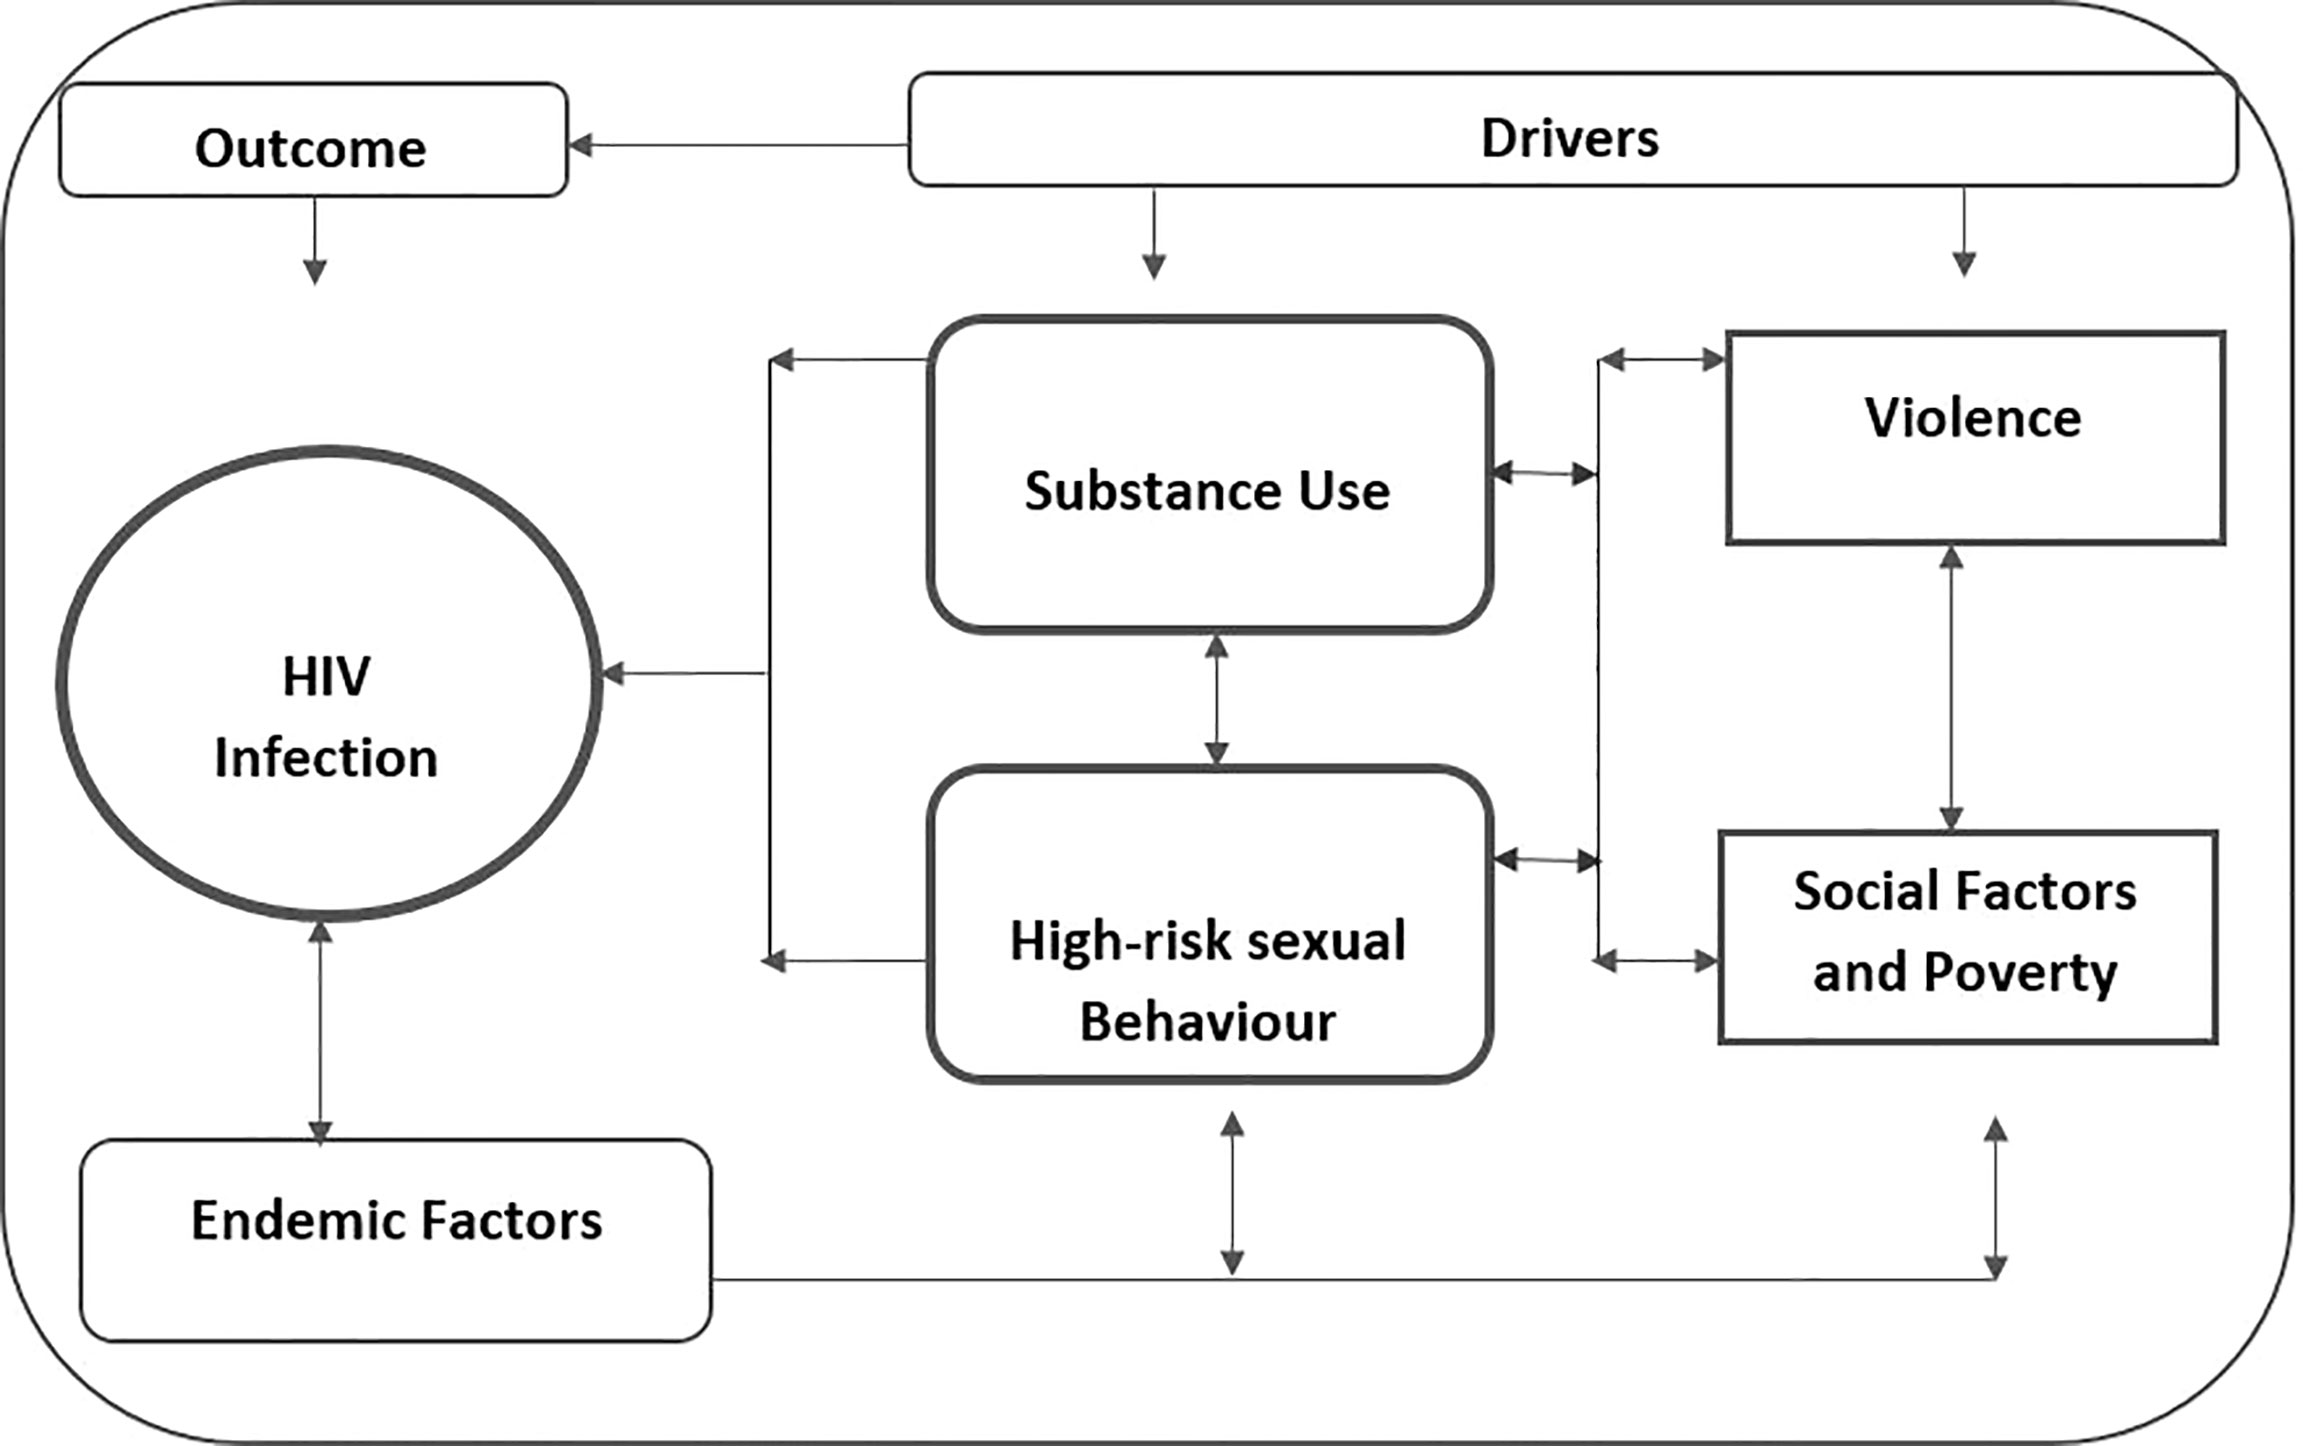 Frontiers The Syndemic of Substance Use, High-Risk Sexual Behavior, and Violence A Qualitative Exploration of the Intersections and Implications for HIV/STI Prevention Among Key Populations in Lagos, Nigeria